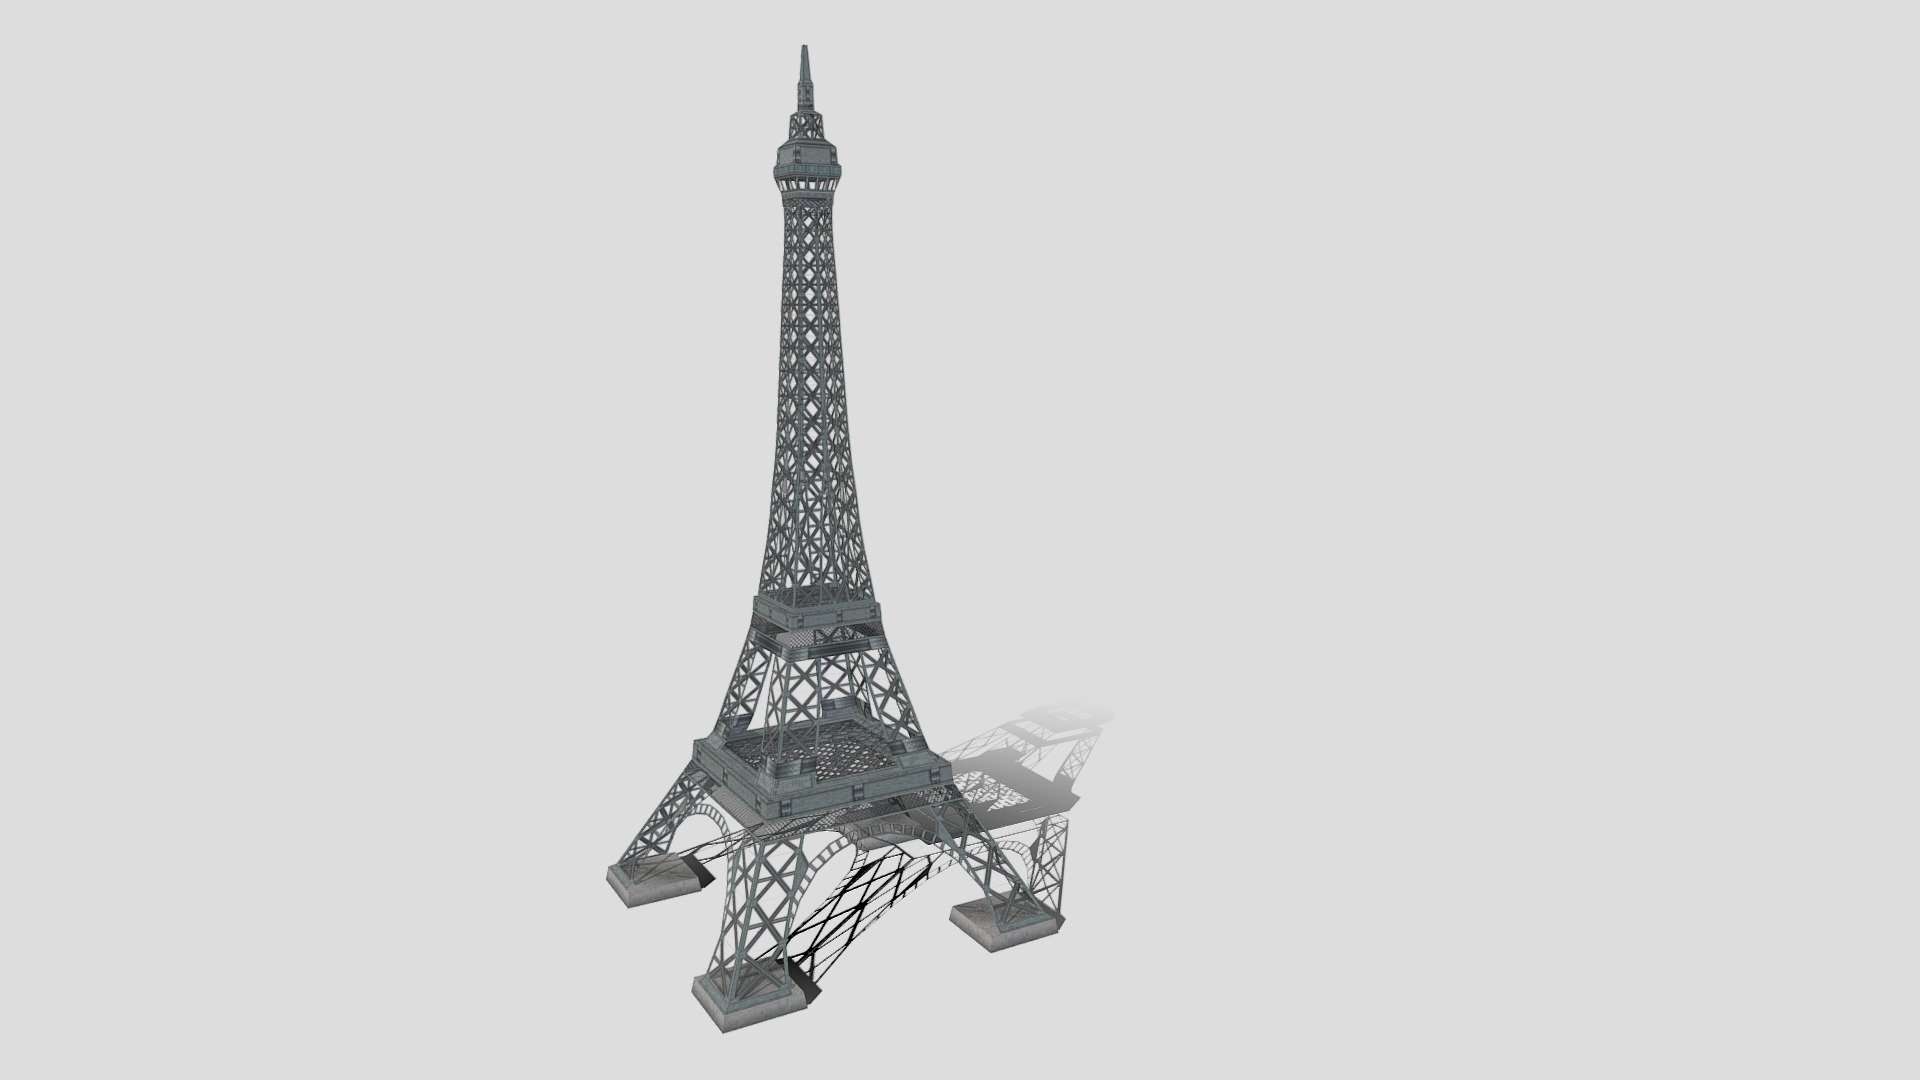 Low poly double-faced Eiffel Tower.
512x PNG Texture with transparency.
1/16 scale: measured in generic 3D units (837. Height x 346. width &amp; lenght )
It was made by me to be used on a game level, the faces are doubled due to the limitations of the engine it was made to be used on 3d model